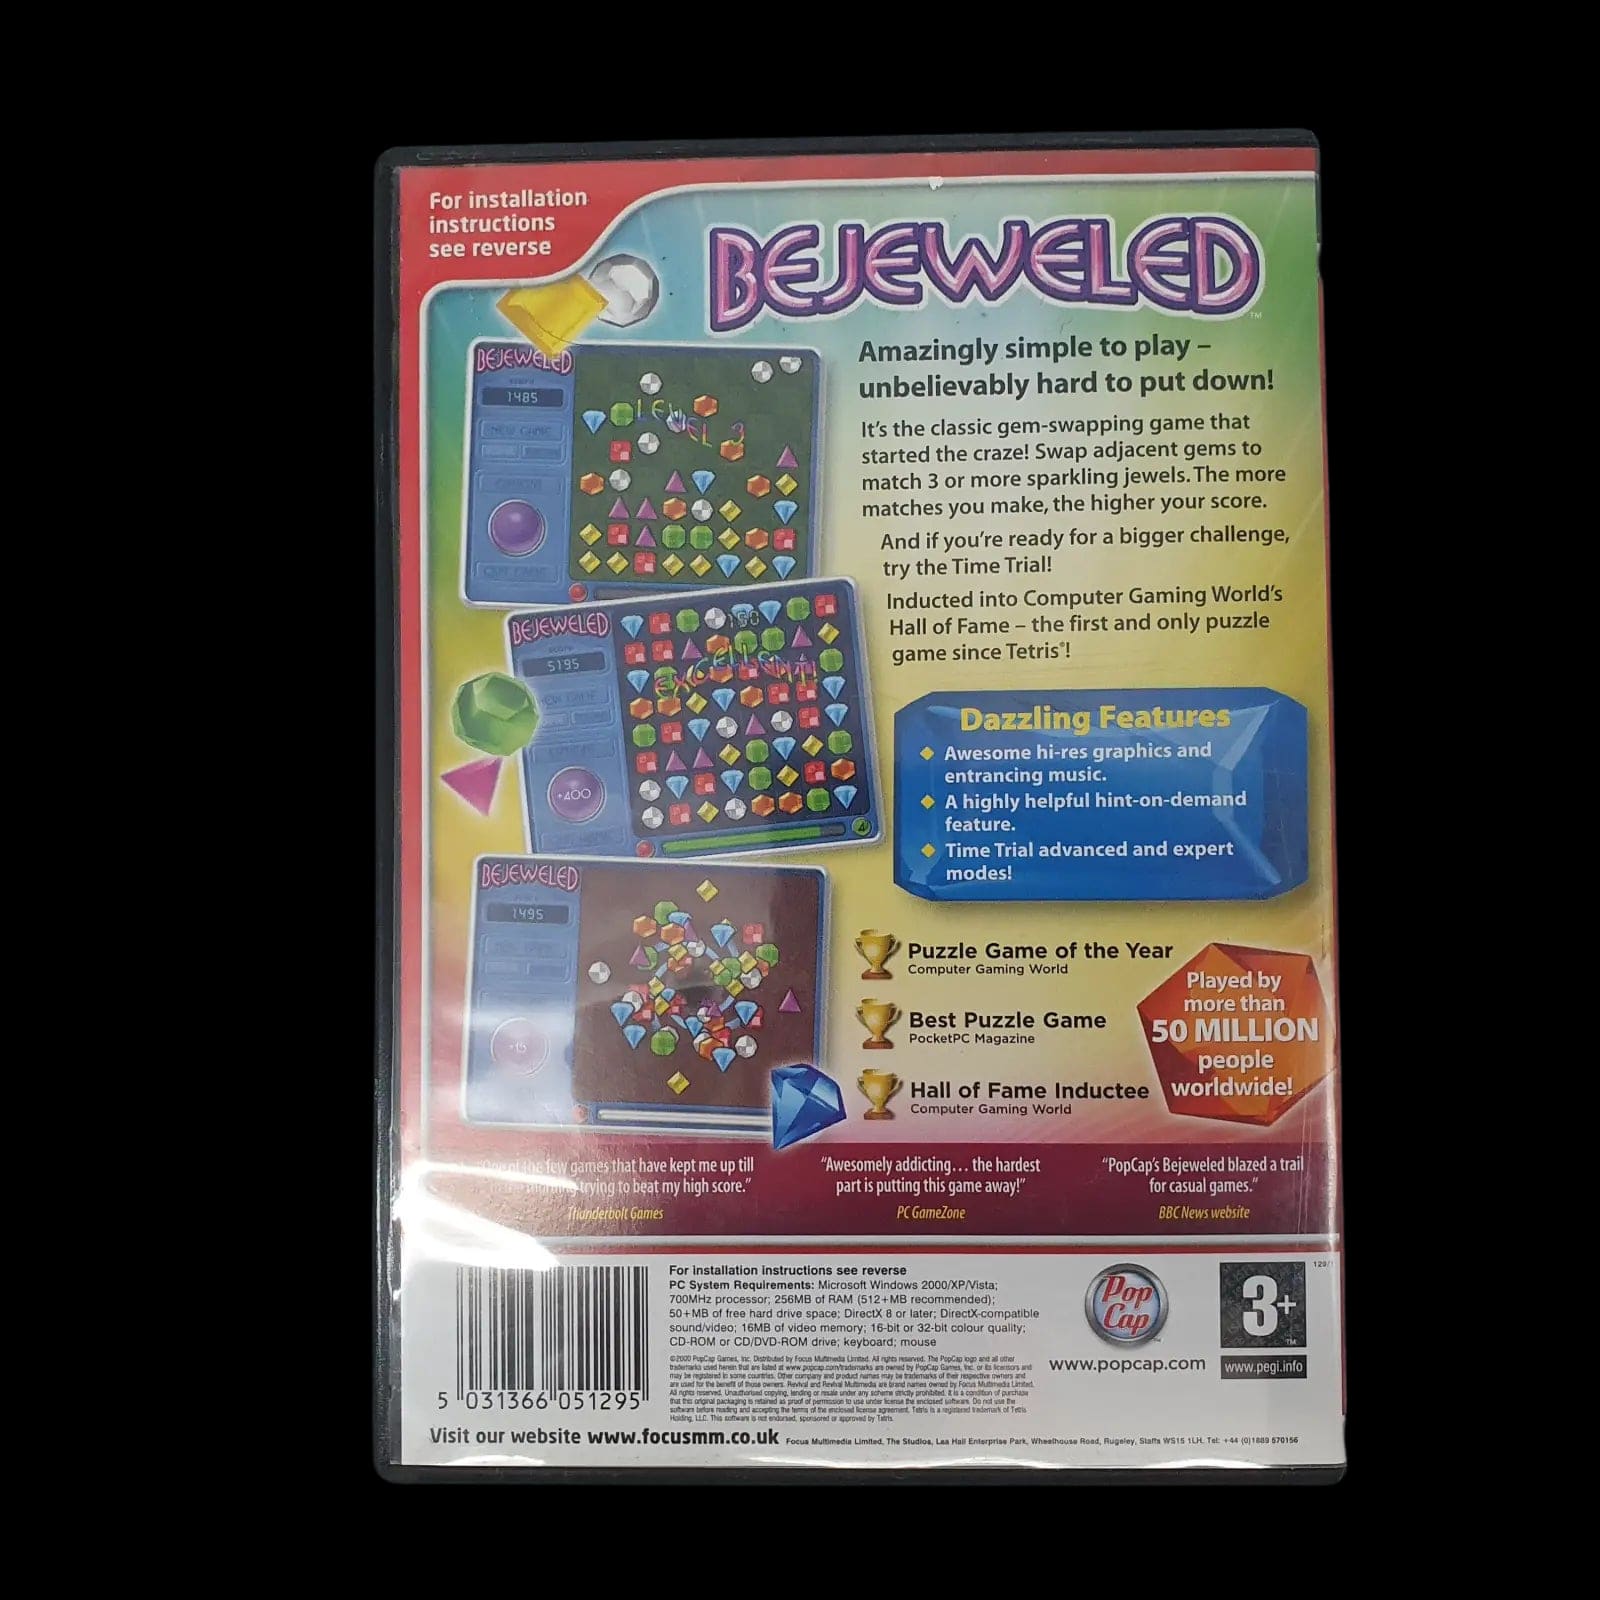 Bejeweled Pc Revival 2000 Video Game - Games - 2 - 2454